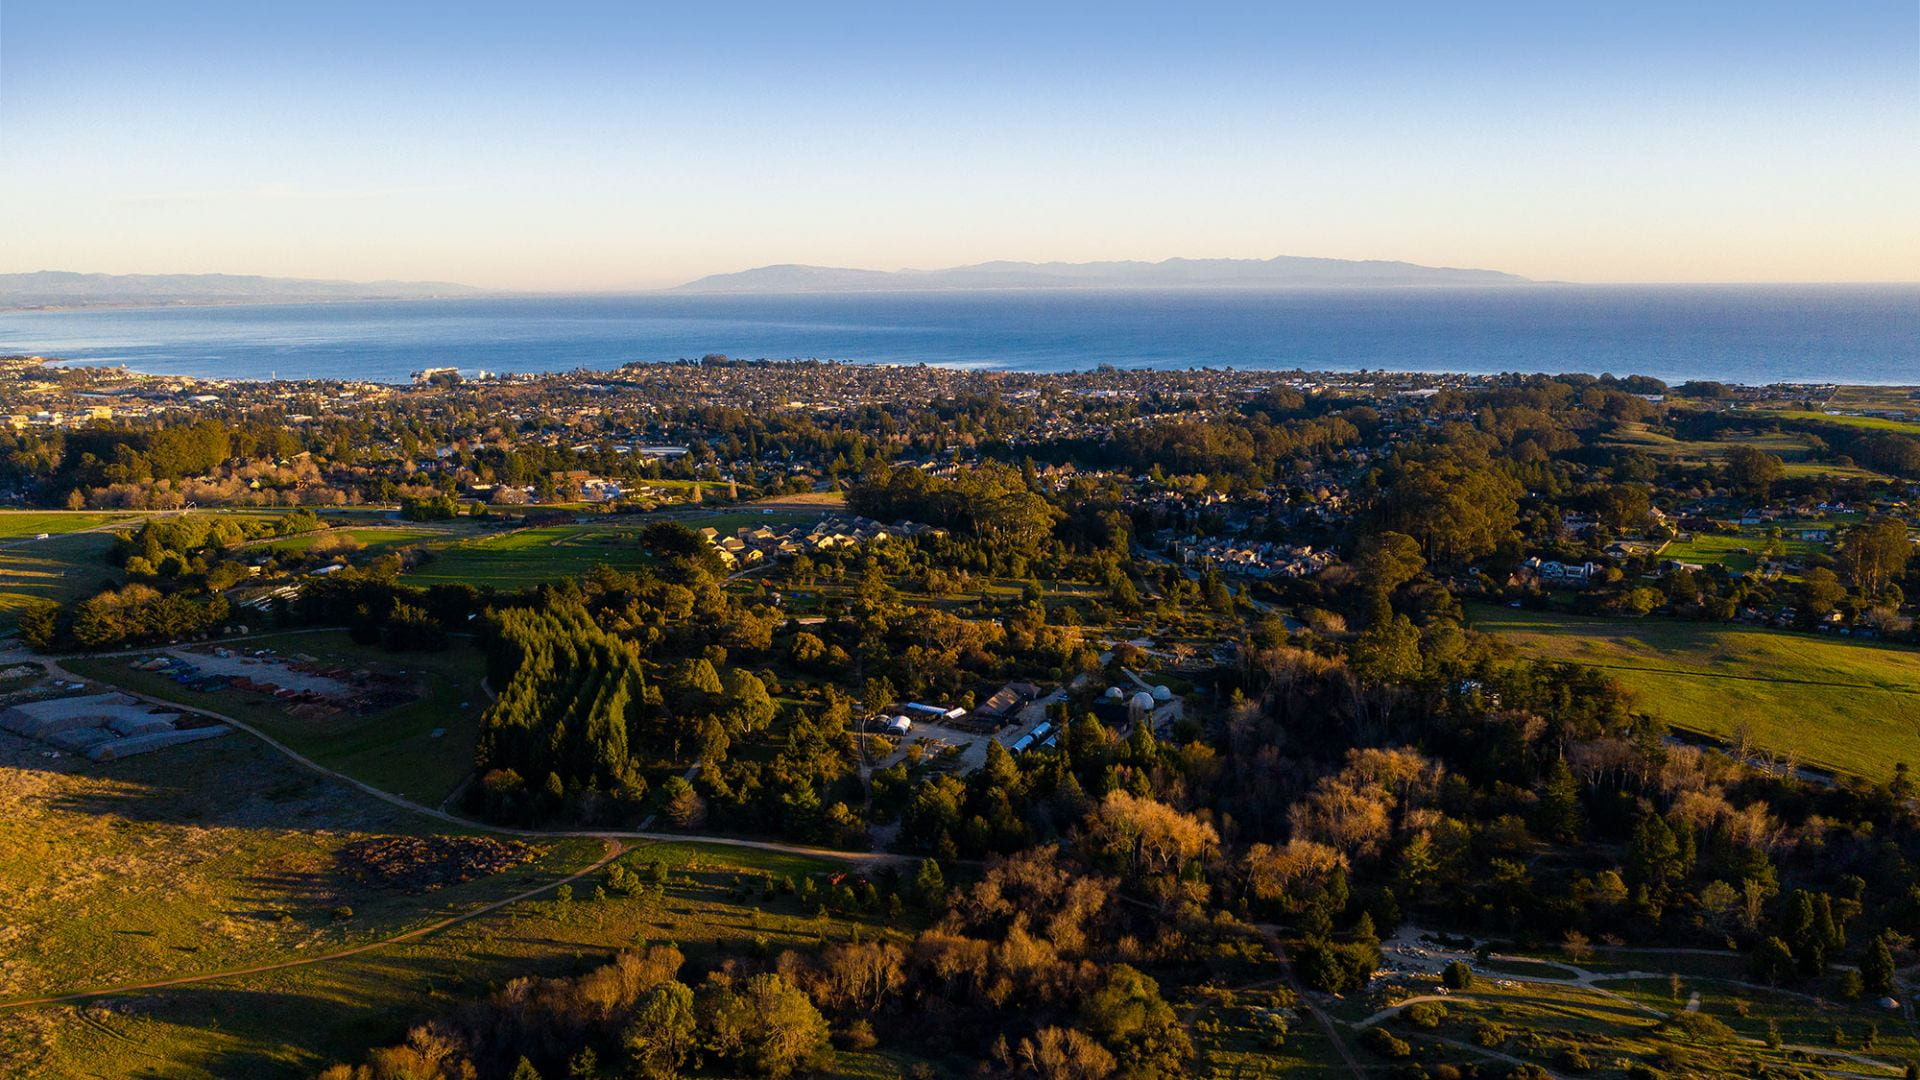 Aerial image with campus in the foreground and the Monterey Bay in the background.